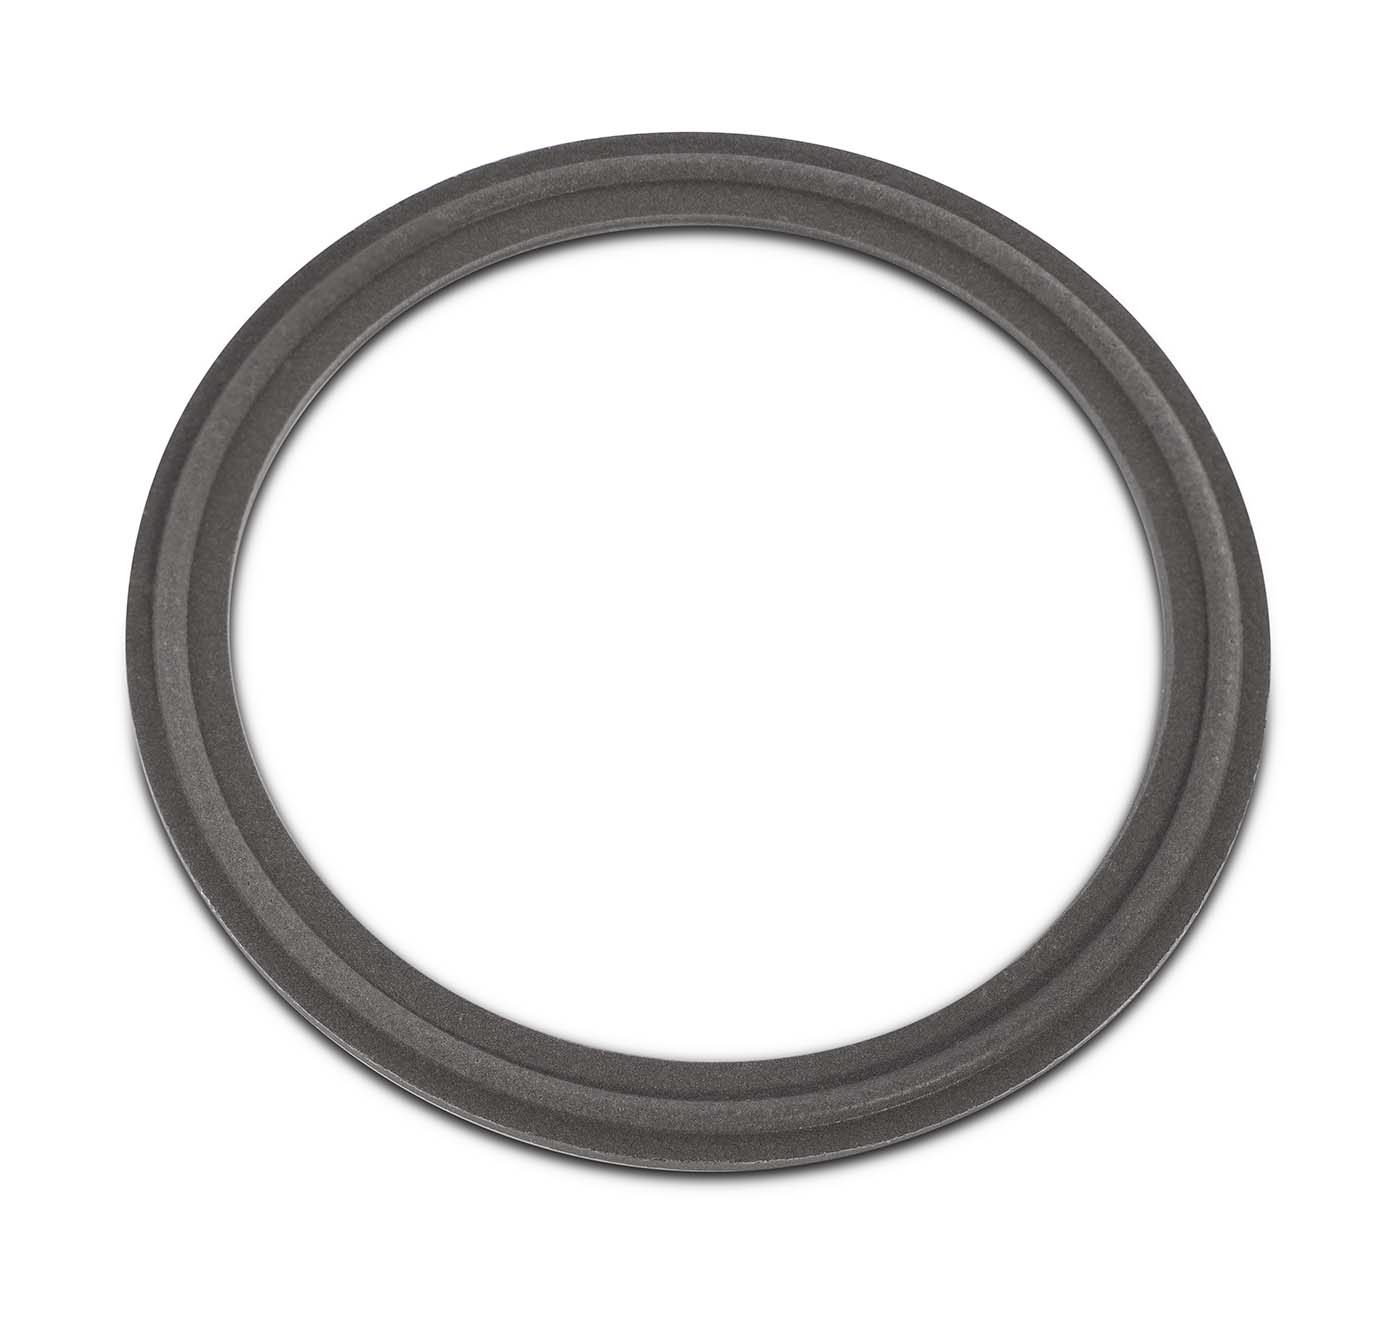 Tef-Steel PTFE / Stainless Steel Sanitary Tri-Clamp Gasket Shop All Categories BVV 3-inch